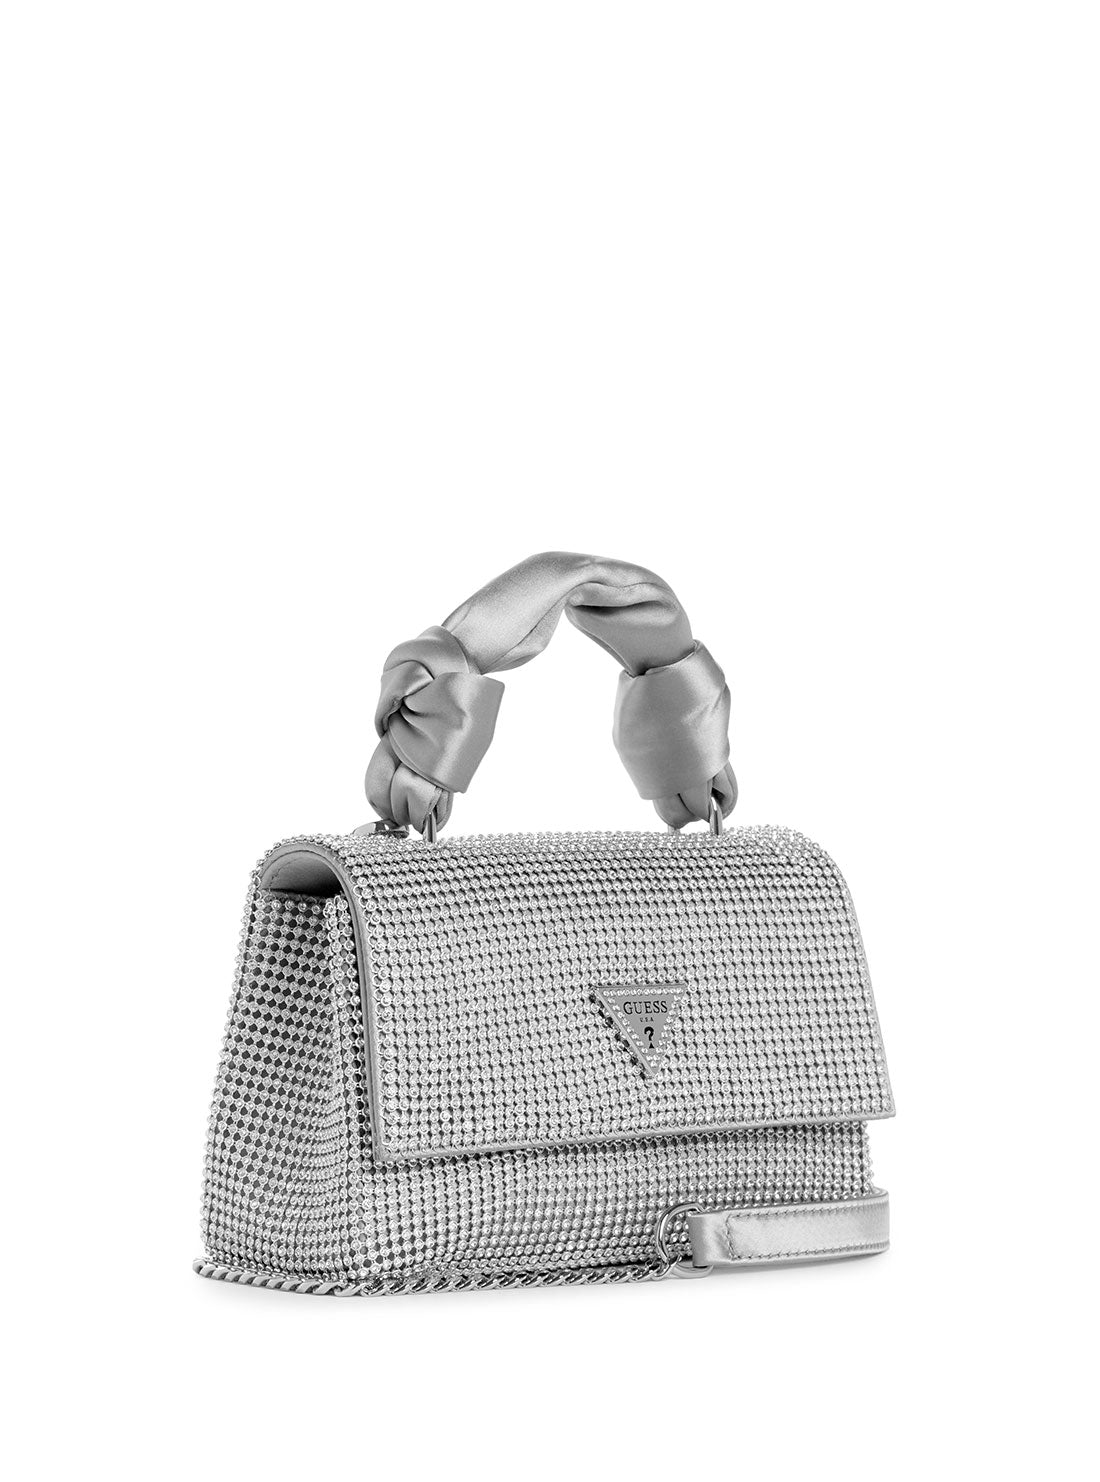 GUESS Silver Lua Top Handle Flap Bag side view